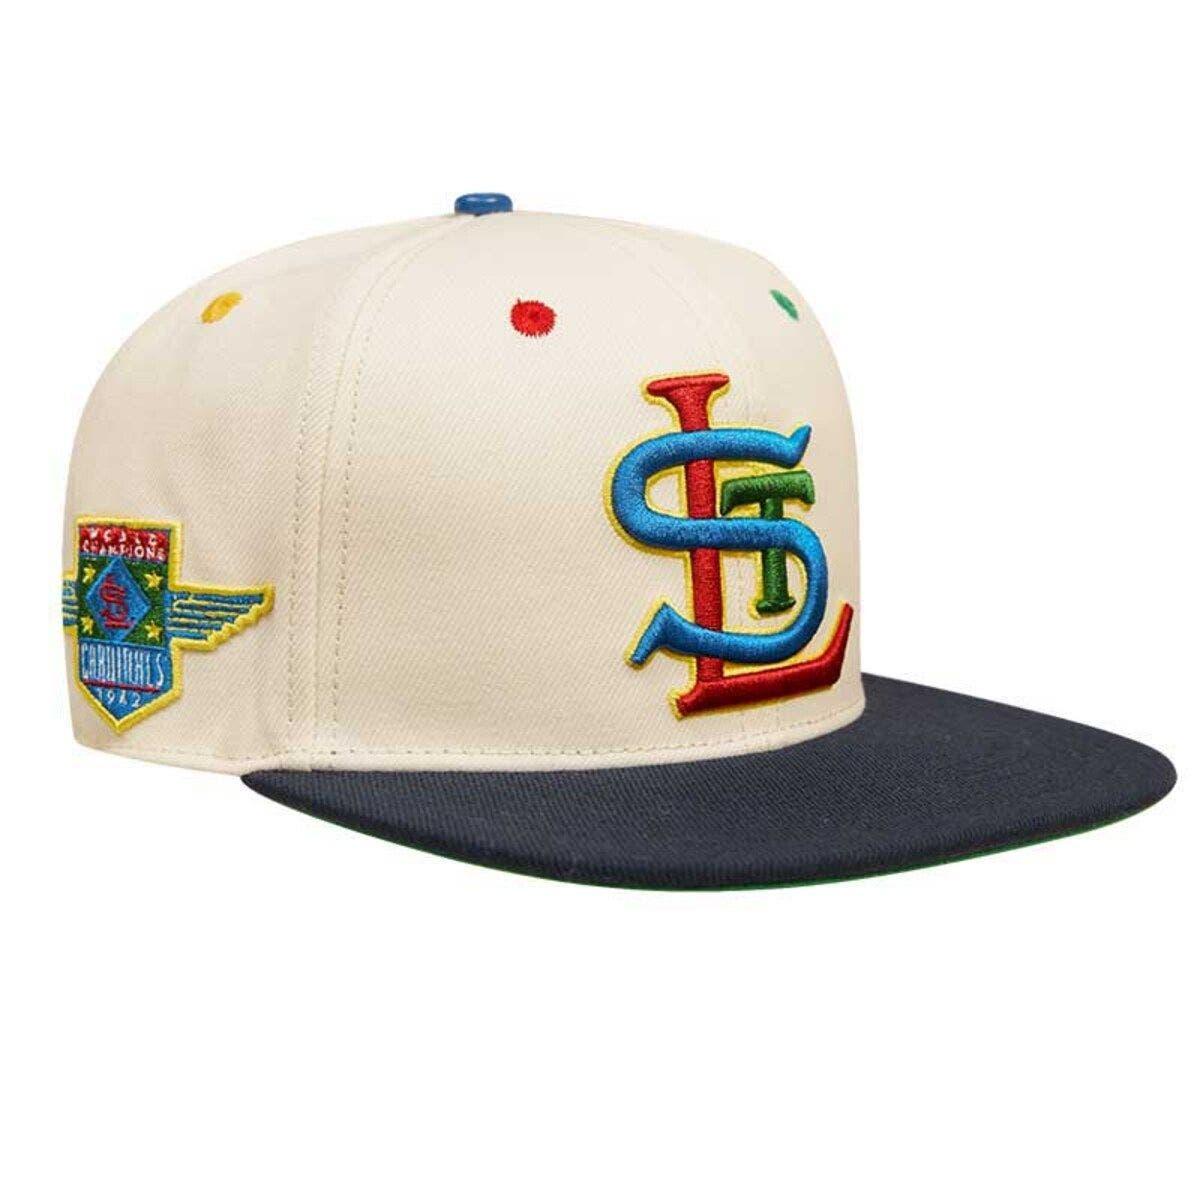 St. Louis Cardinals Script Side Logo ‘47 Cooperstown Collection Snapback Hat